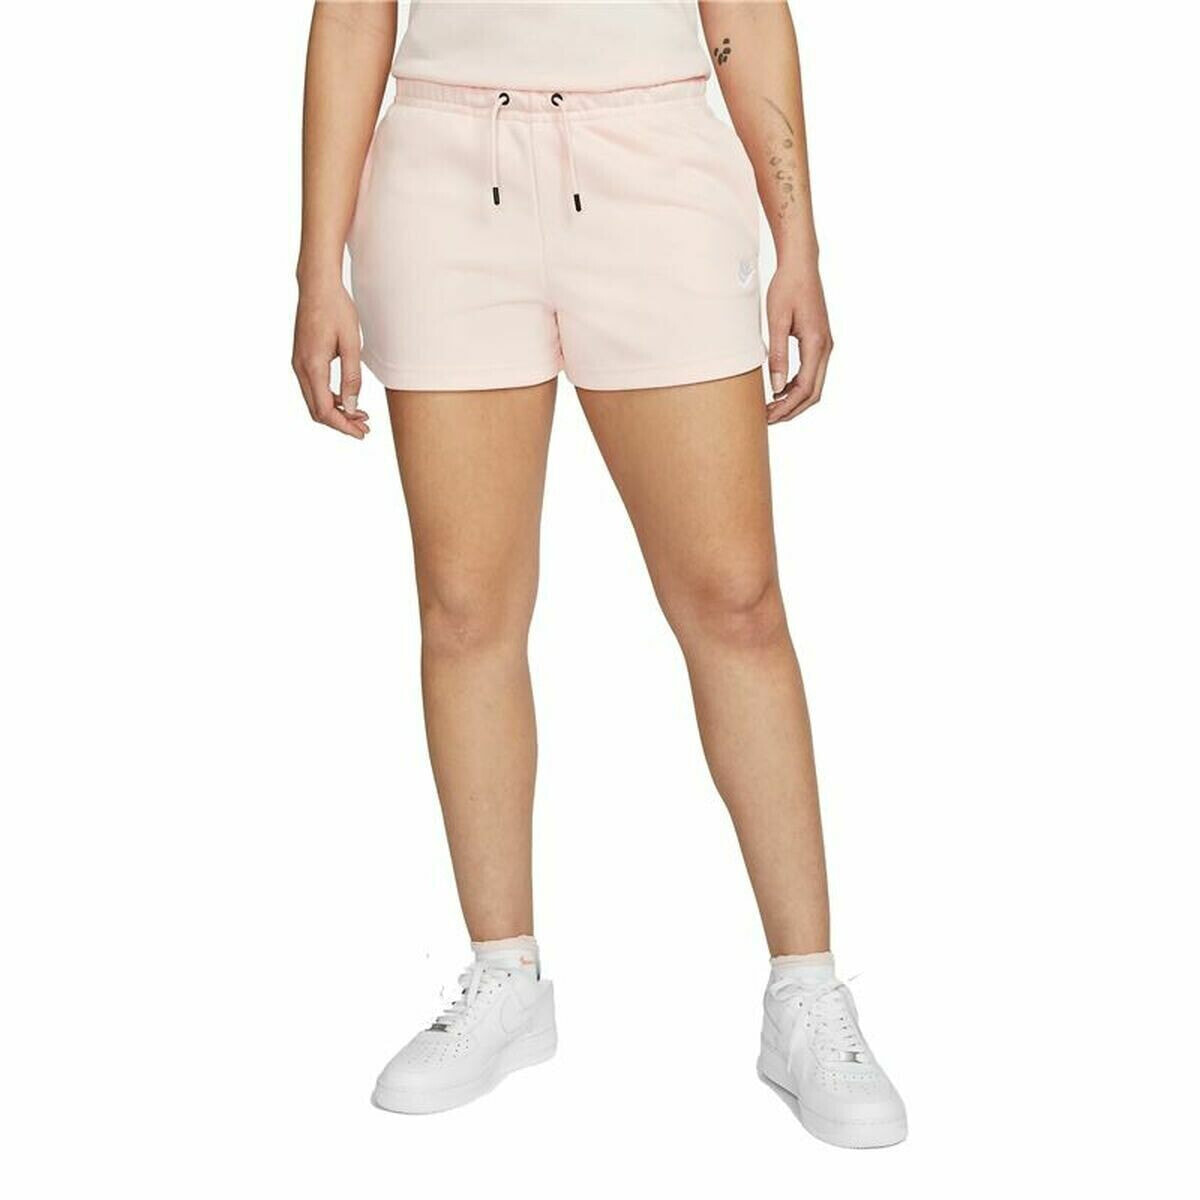 Sports Shorts for Women Nike Essential Pink